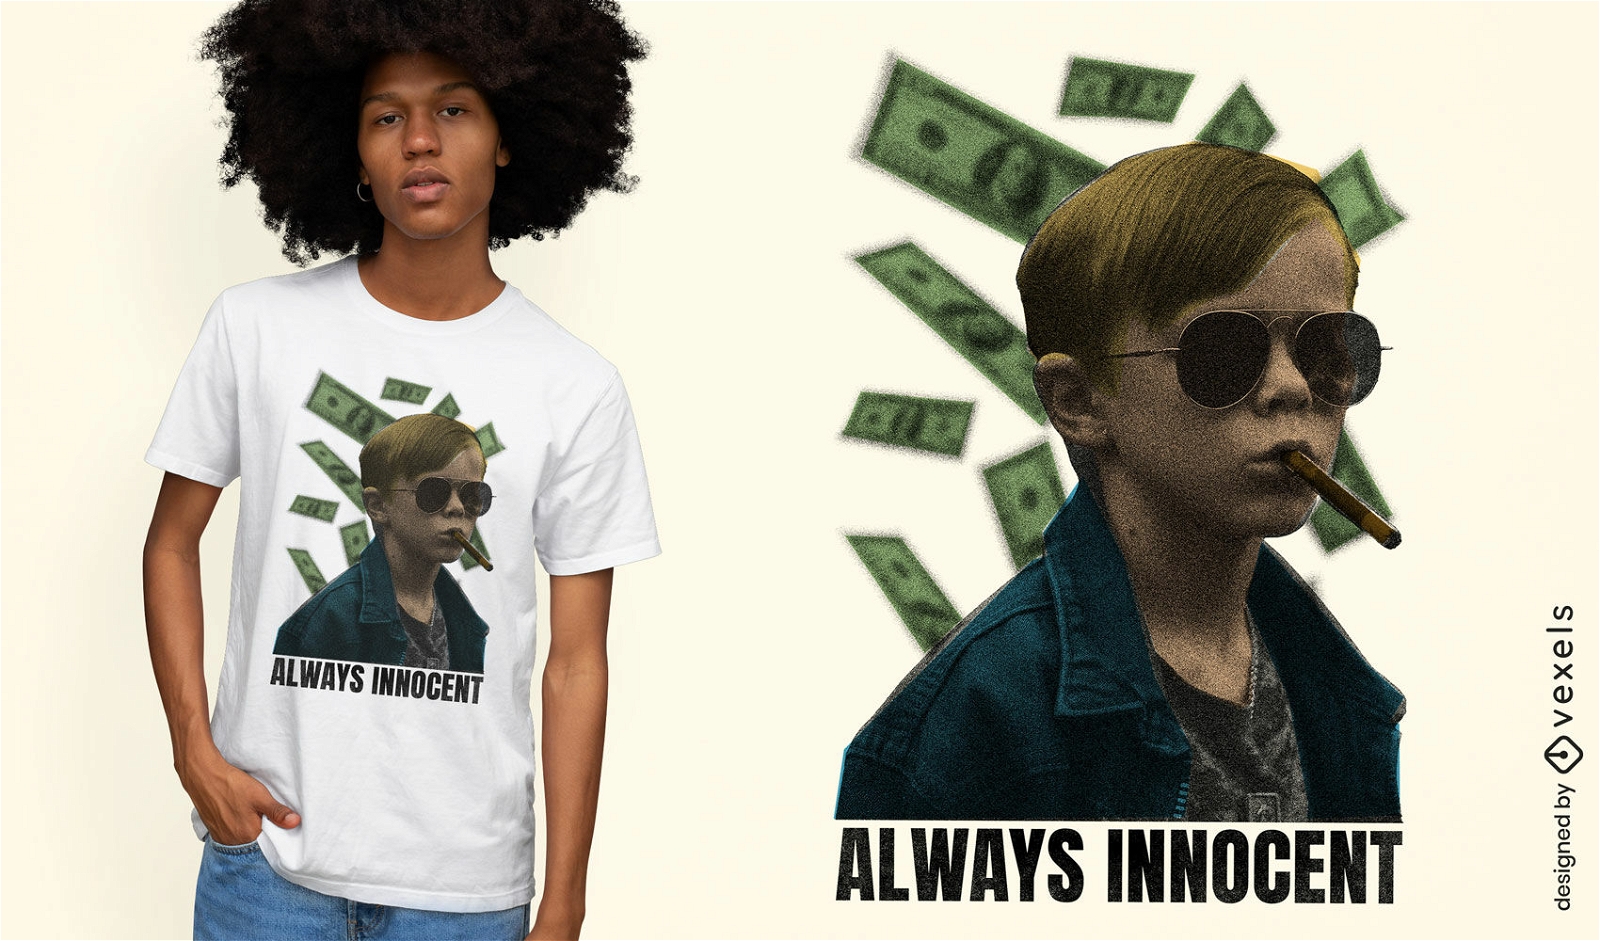 Satirical quote and money t-shirt design